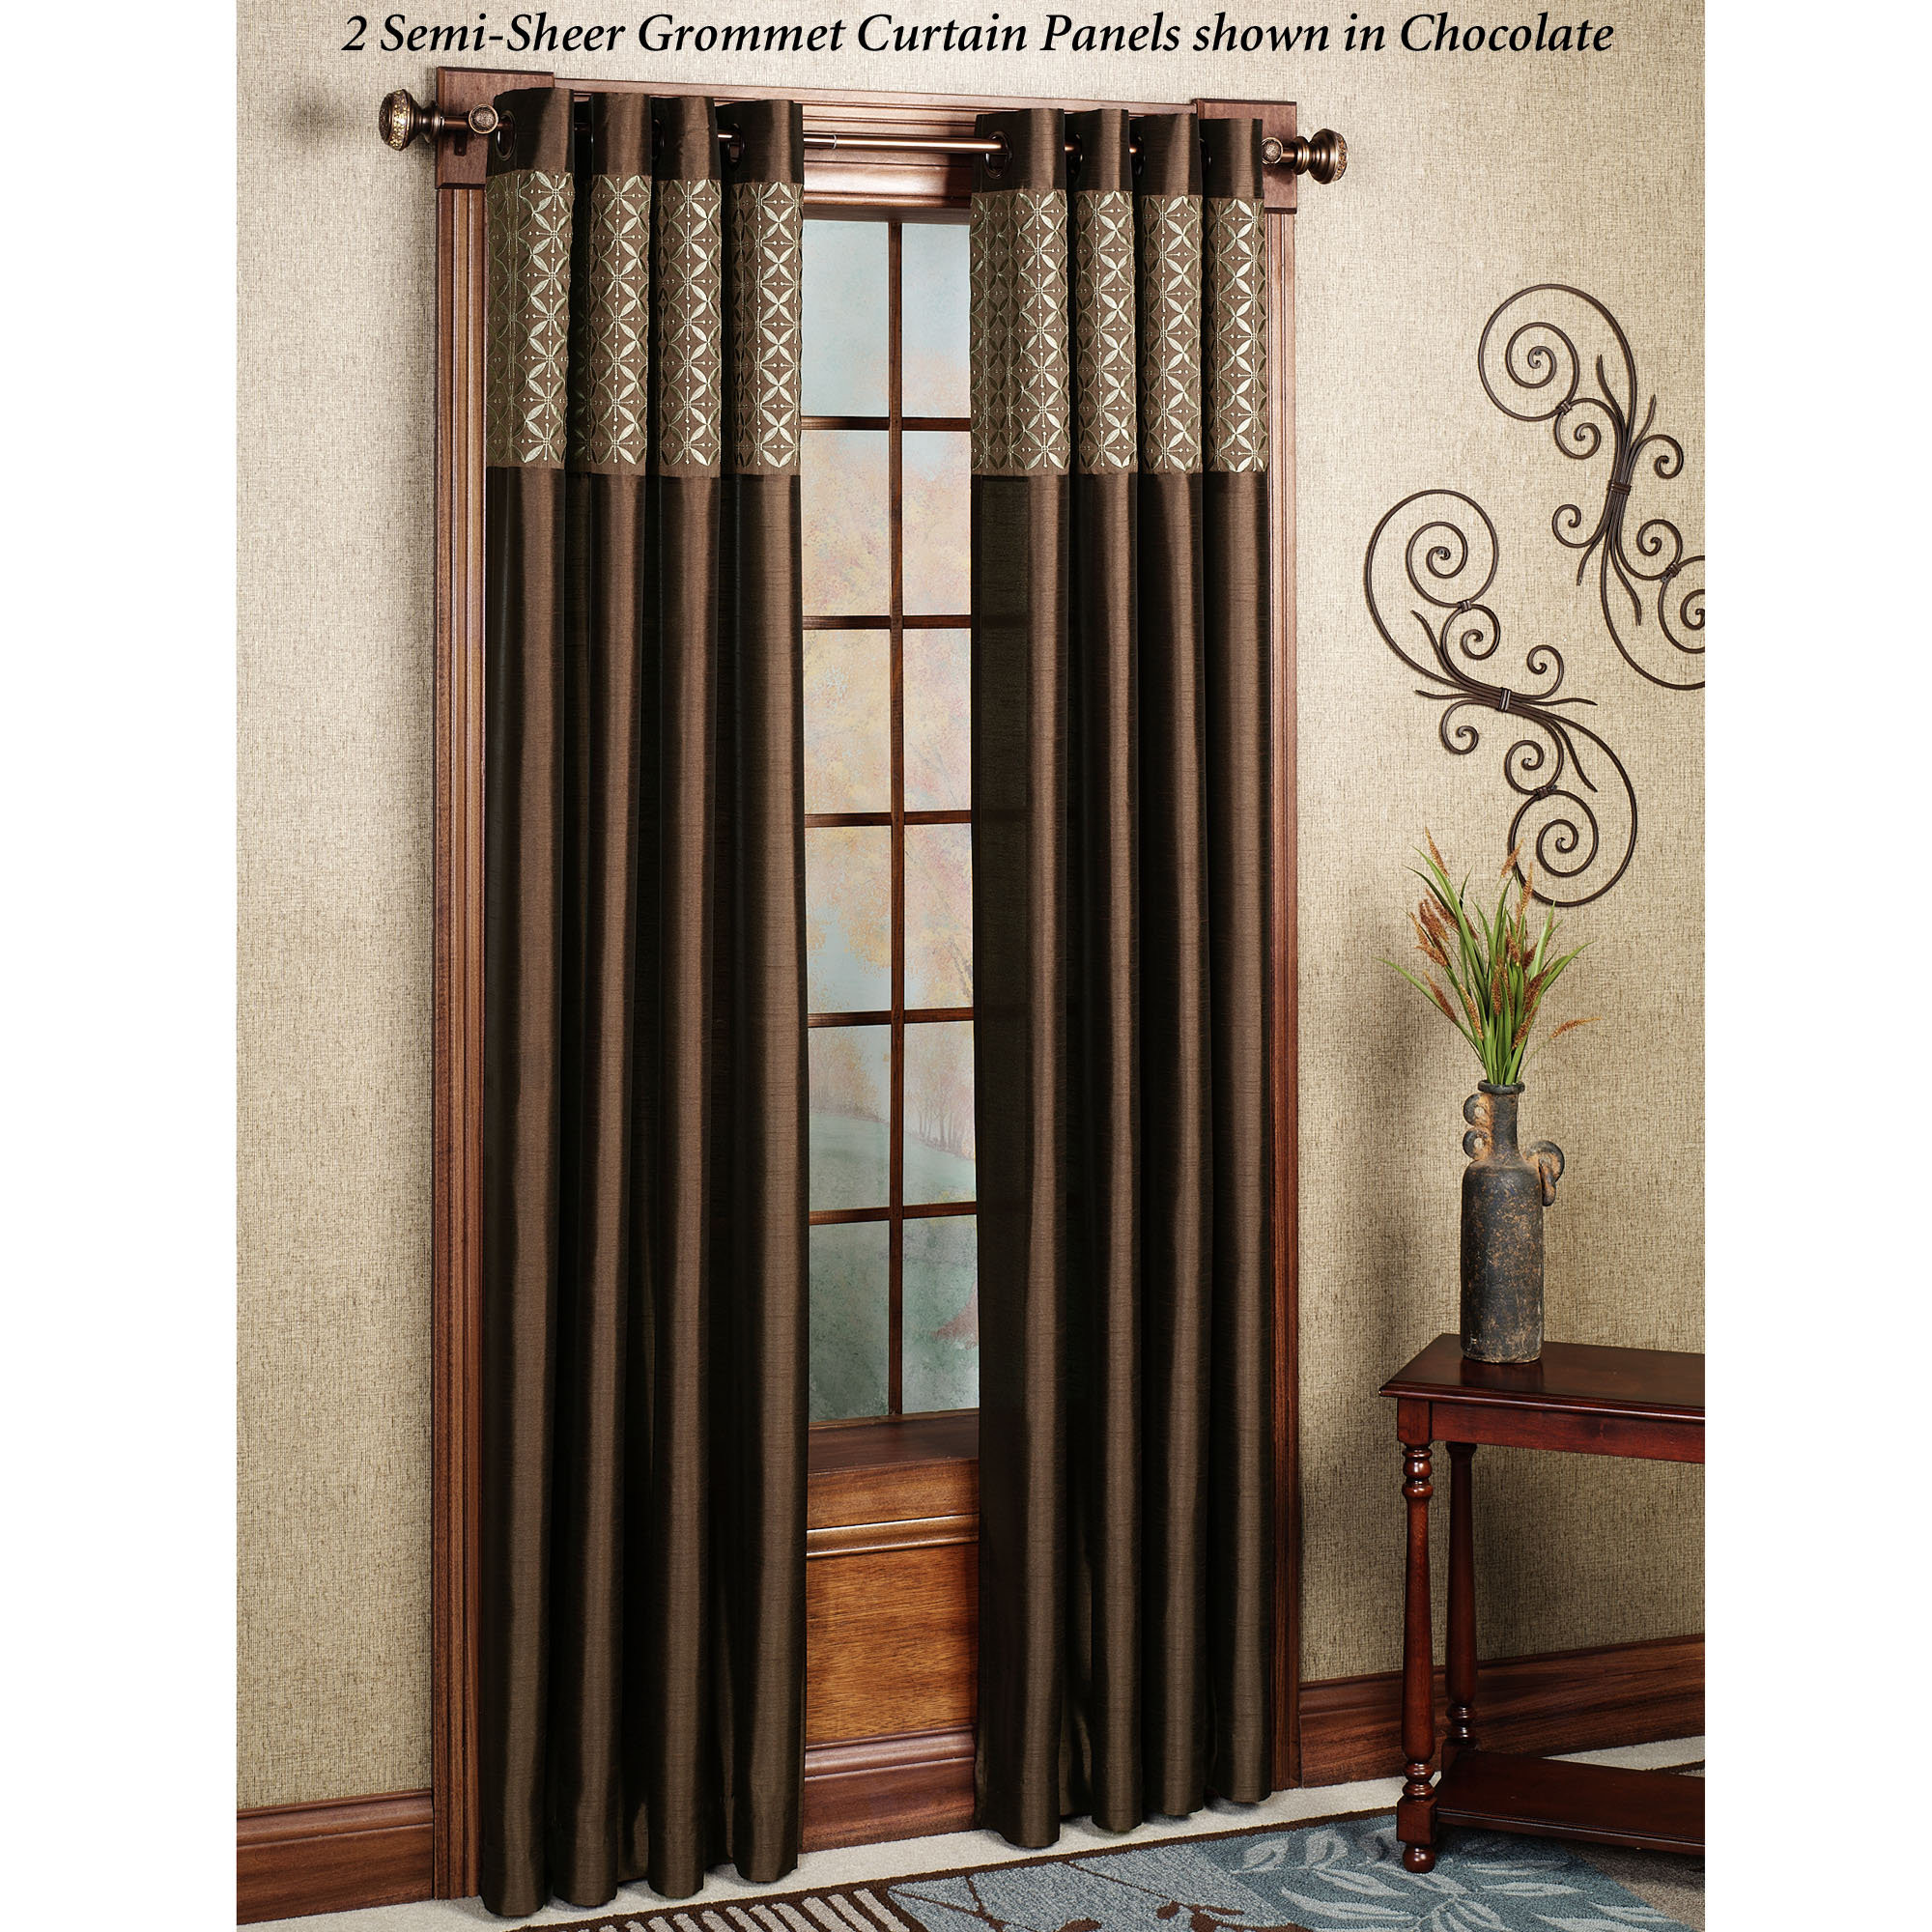 Jcpenney Living Room Curtains
 Interior Get Your Window Covered With Solar Shades Lowes